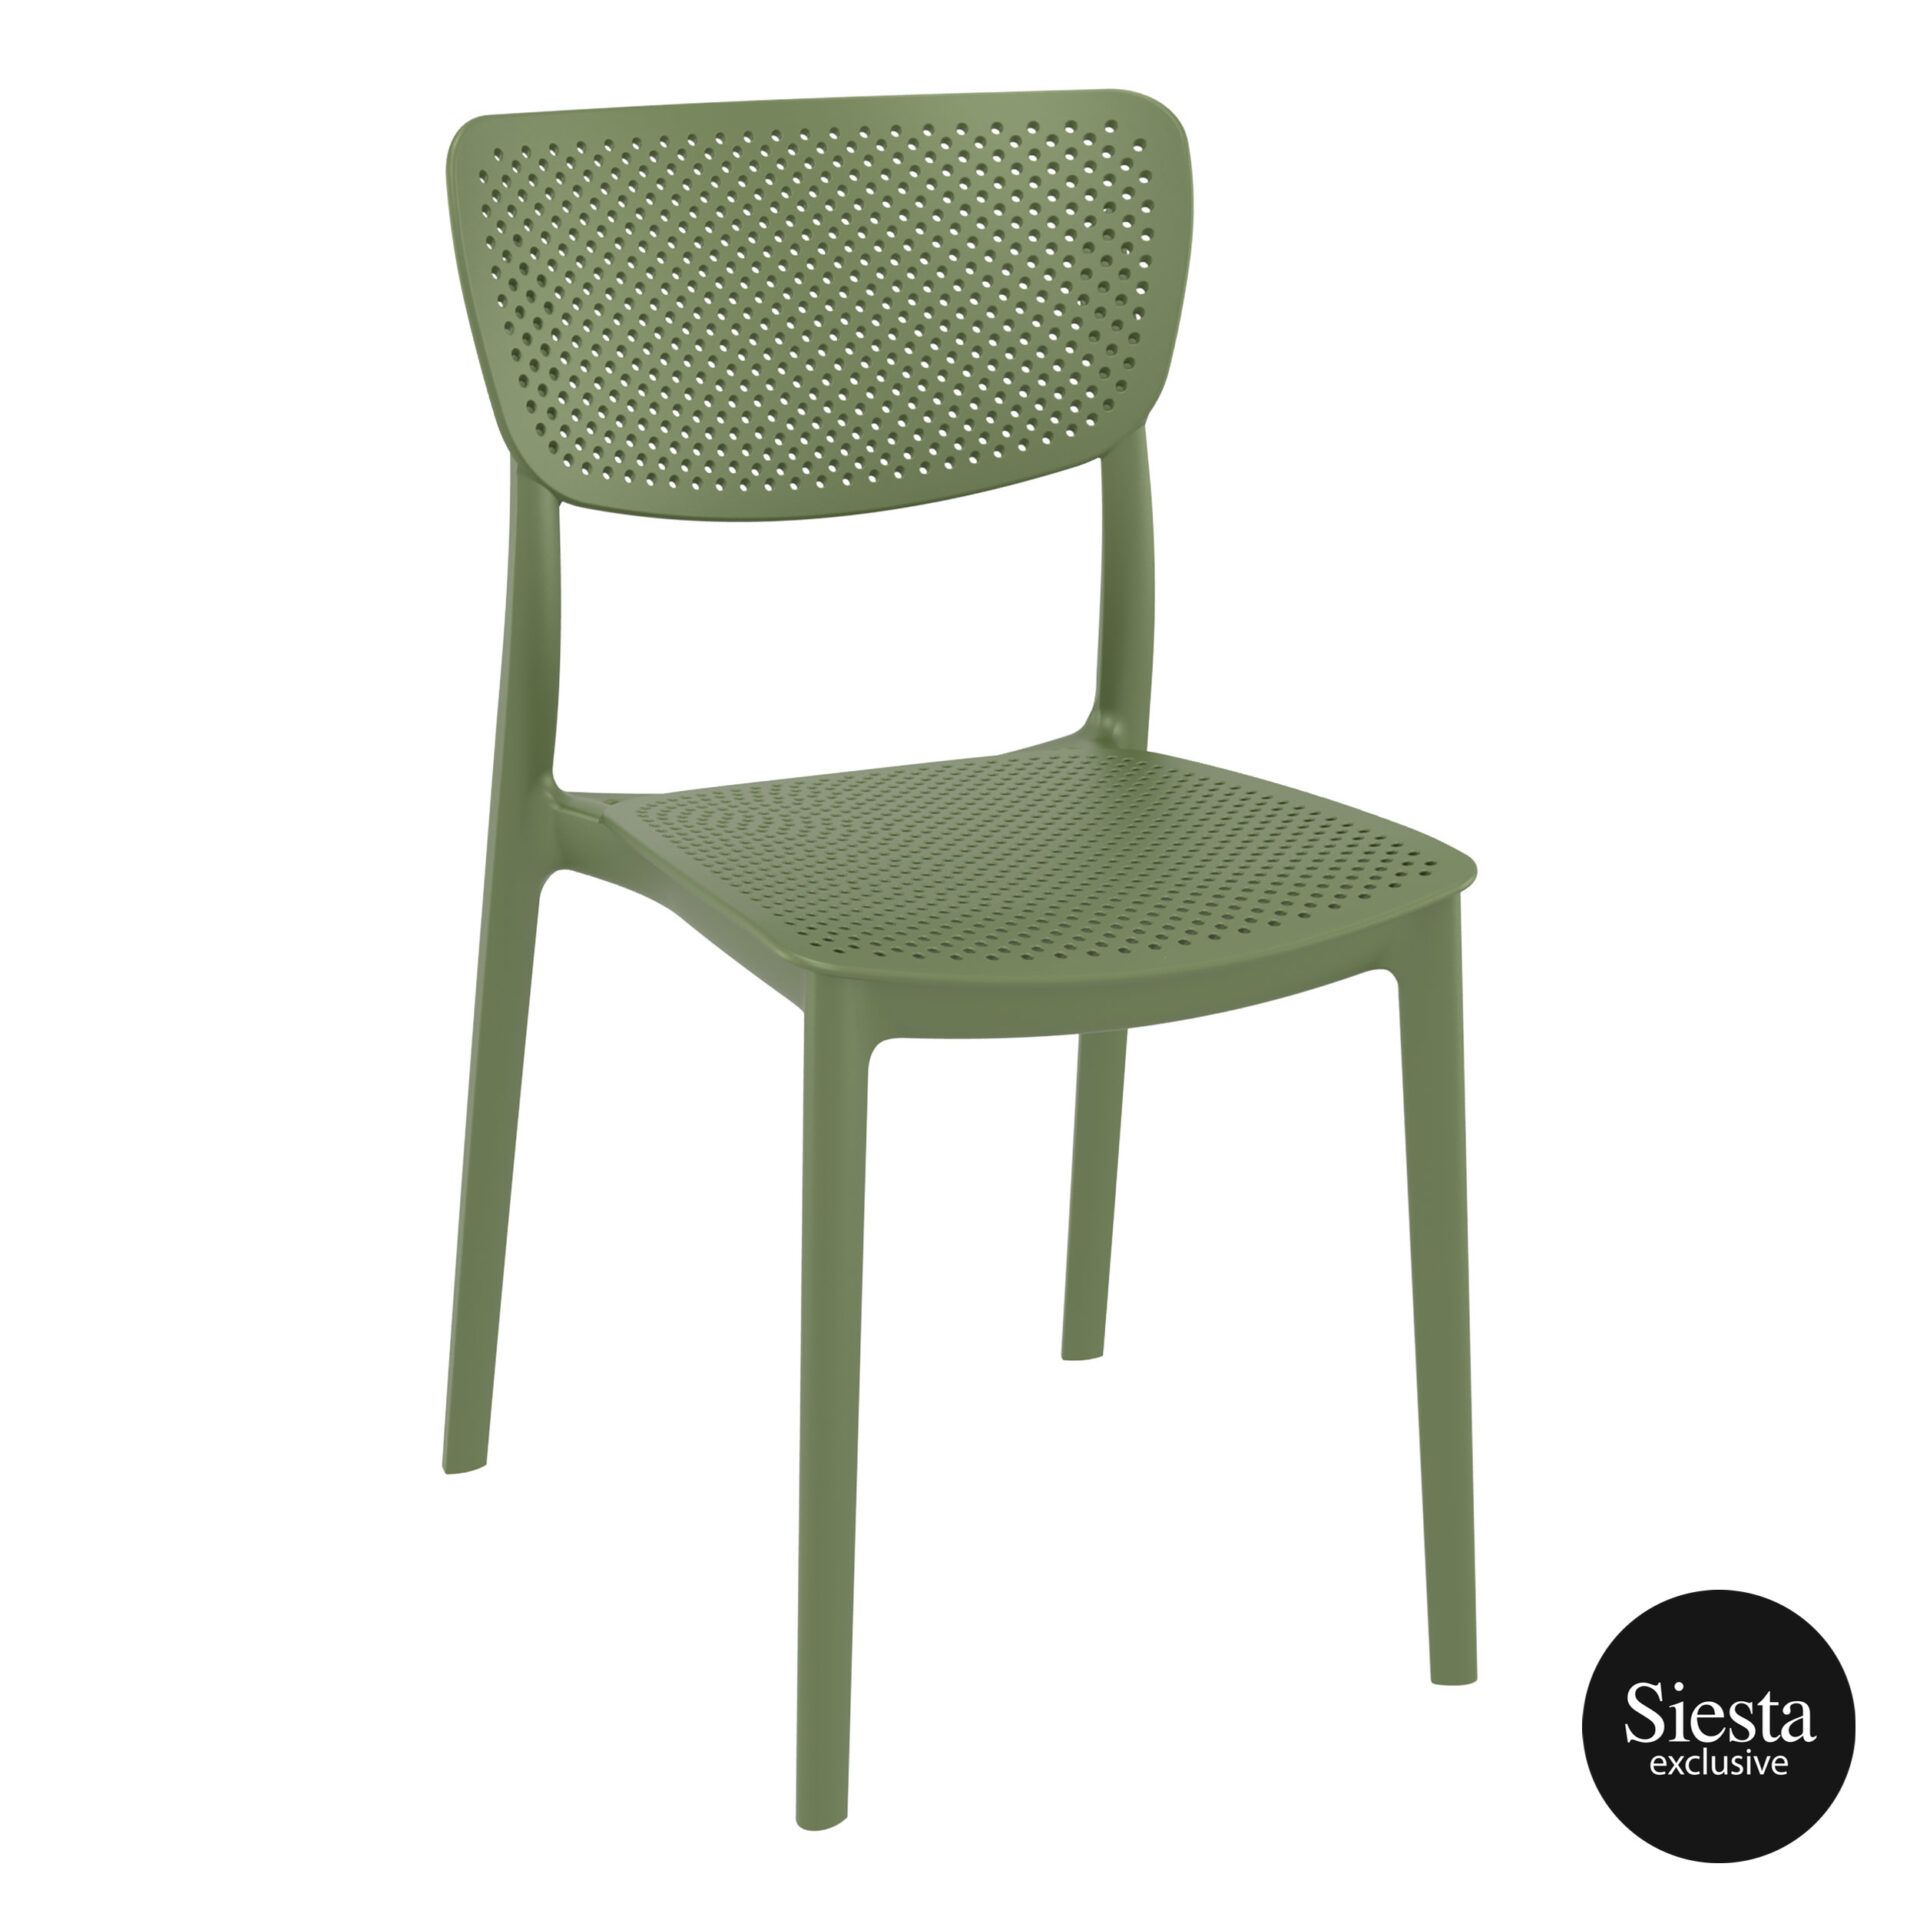 Lucy Chair - Olive Green